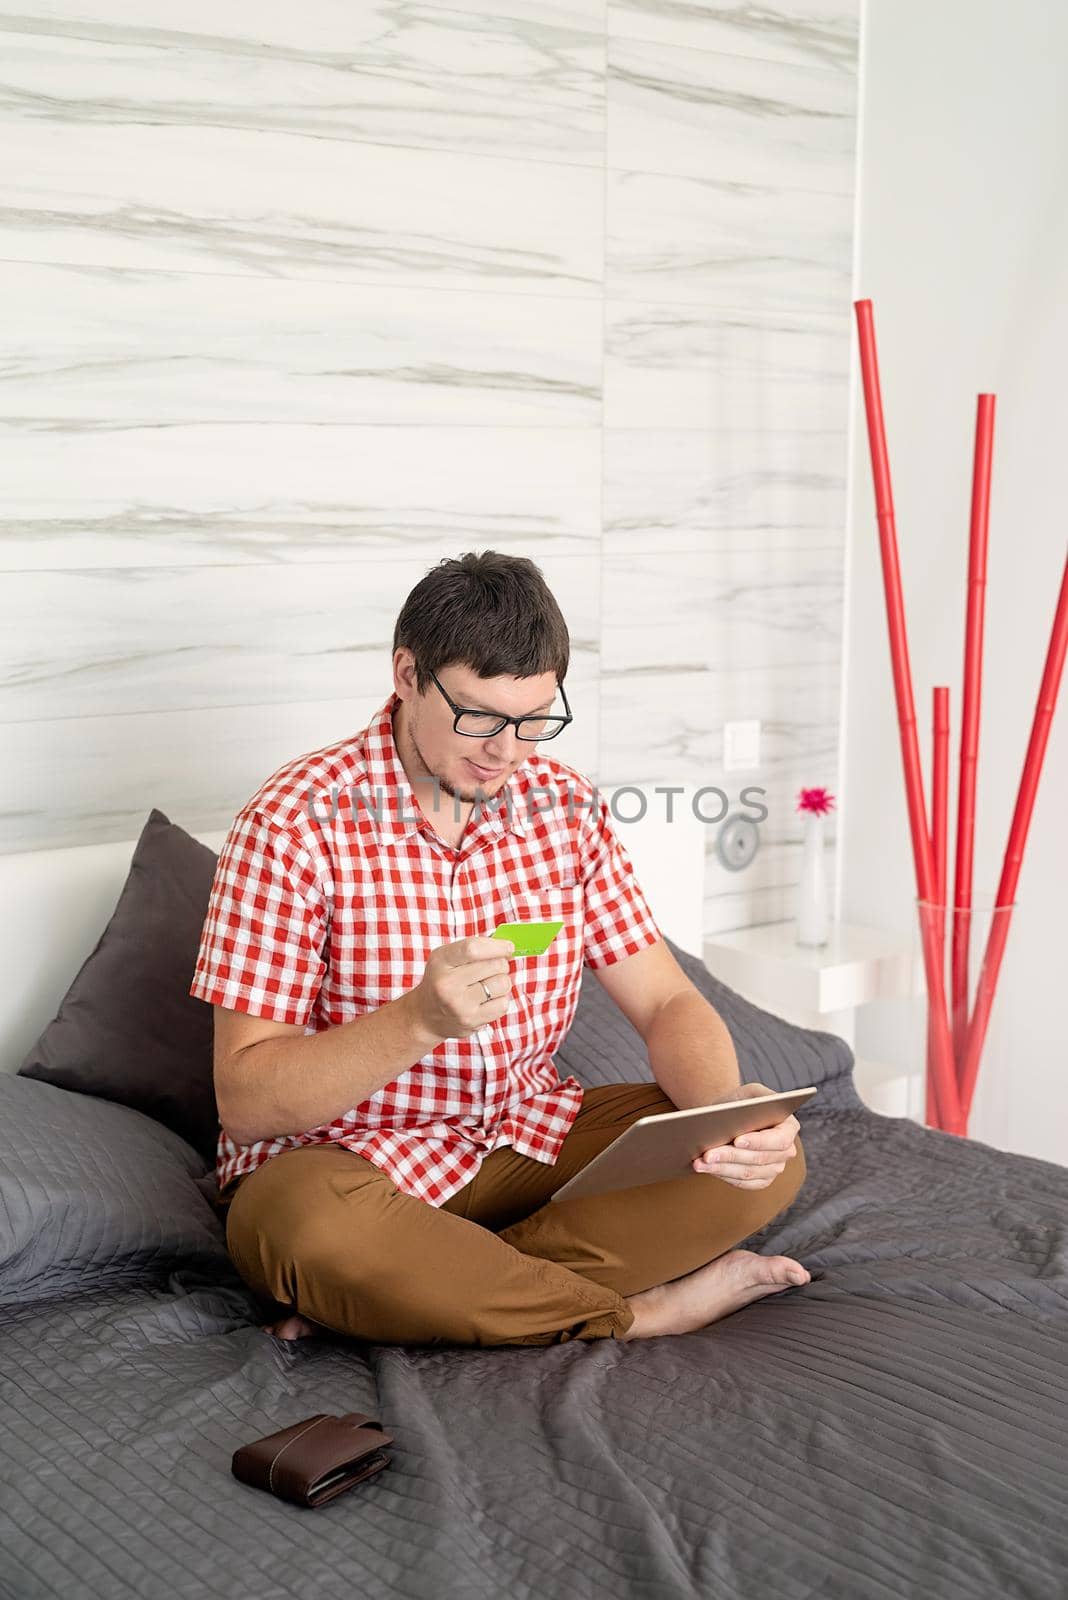 Online shopping concept. Young man sitting on the bed and shopping online using tablet, looking at the credit card